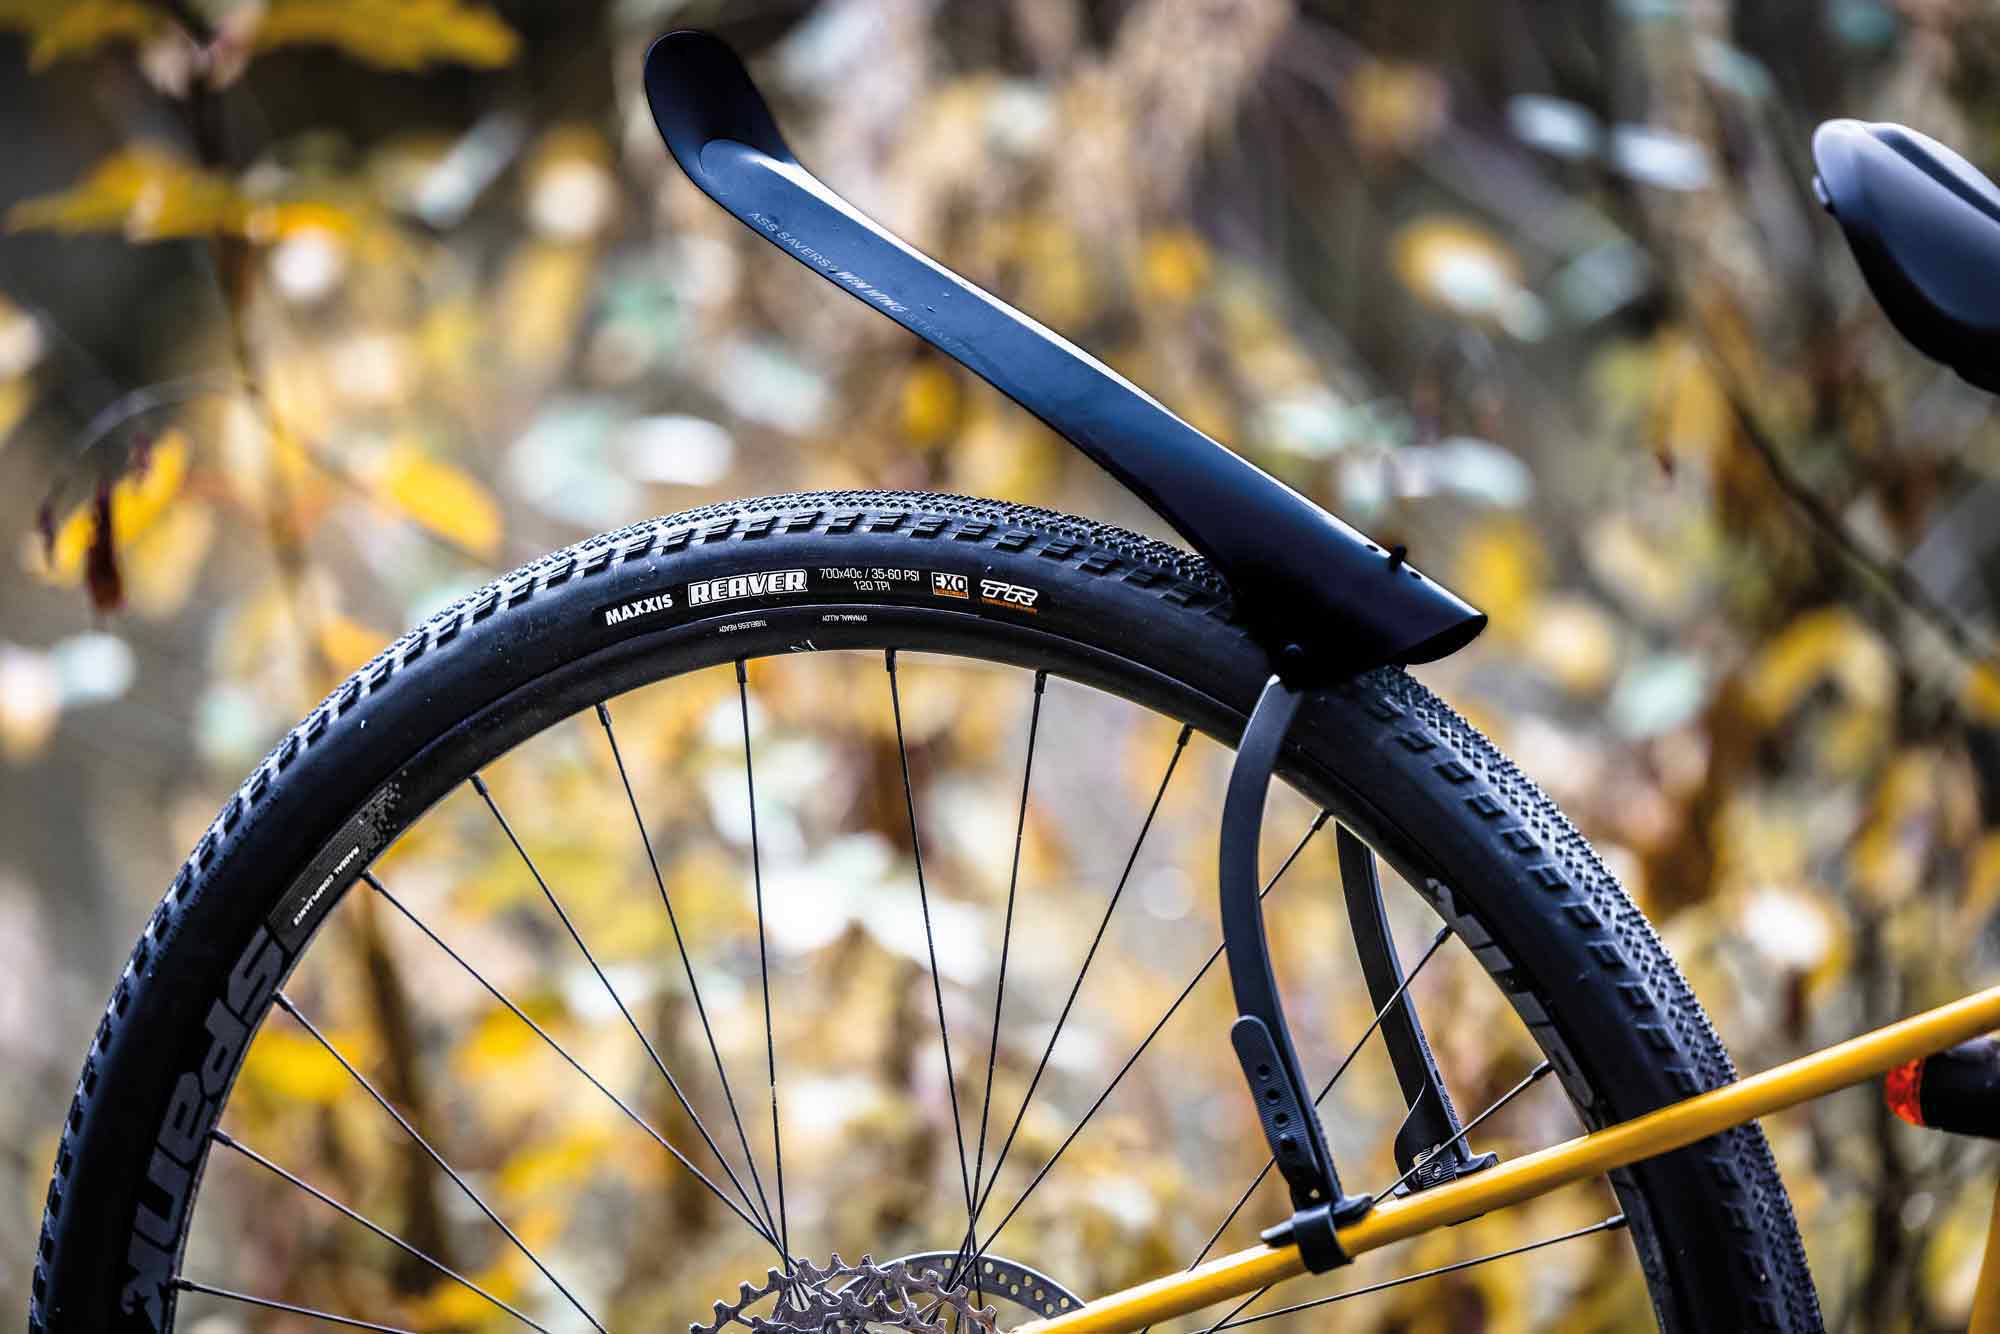 In our maxxis gravel tire test, the new maxxis reaver was also "allowed" to prove itself in winter conditions.